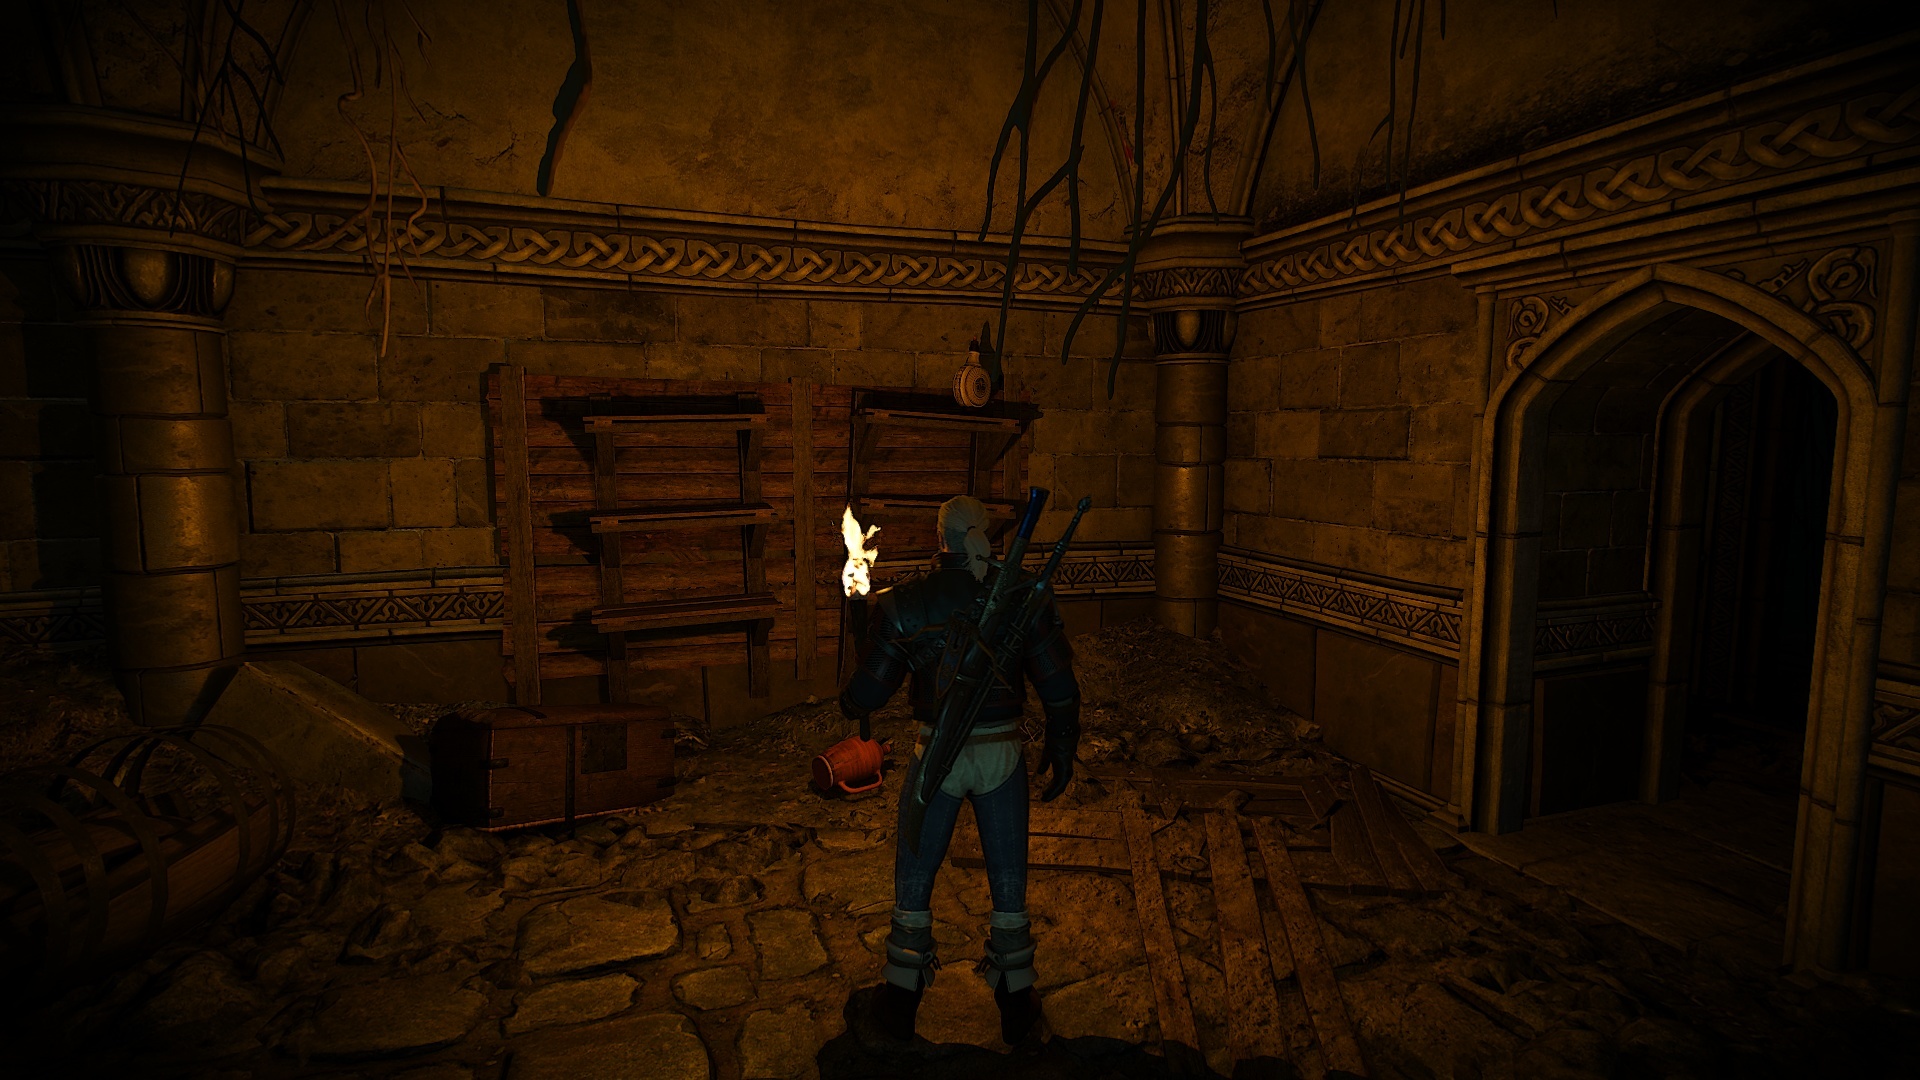 (The new lighting ensures that many rooms now appear much darker than in the original.)